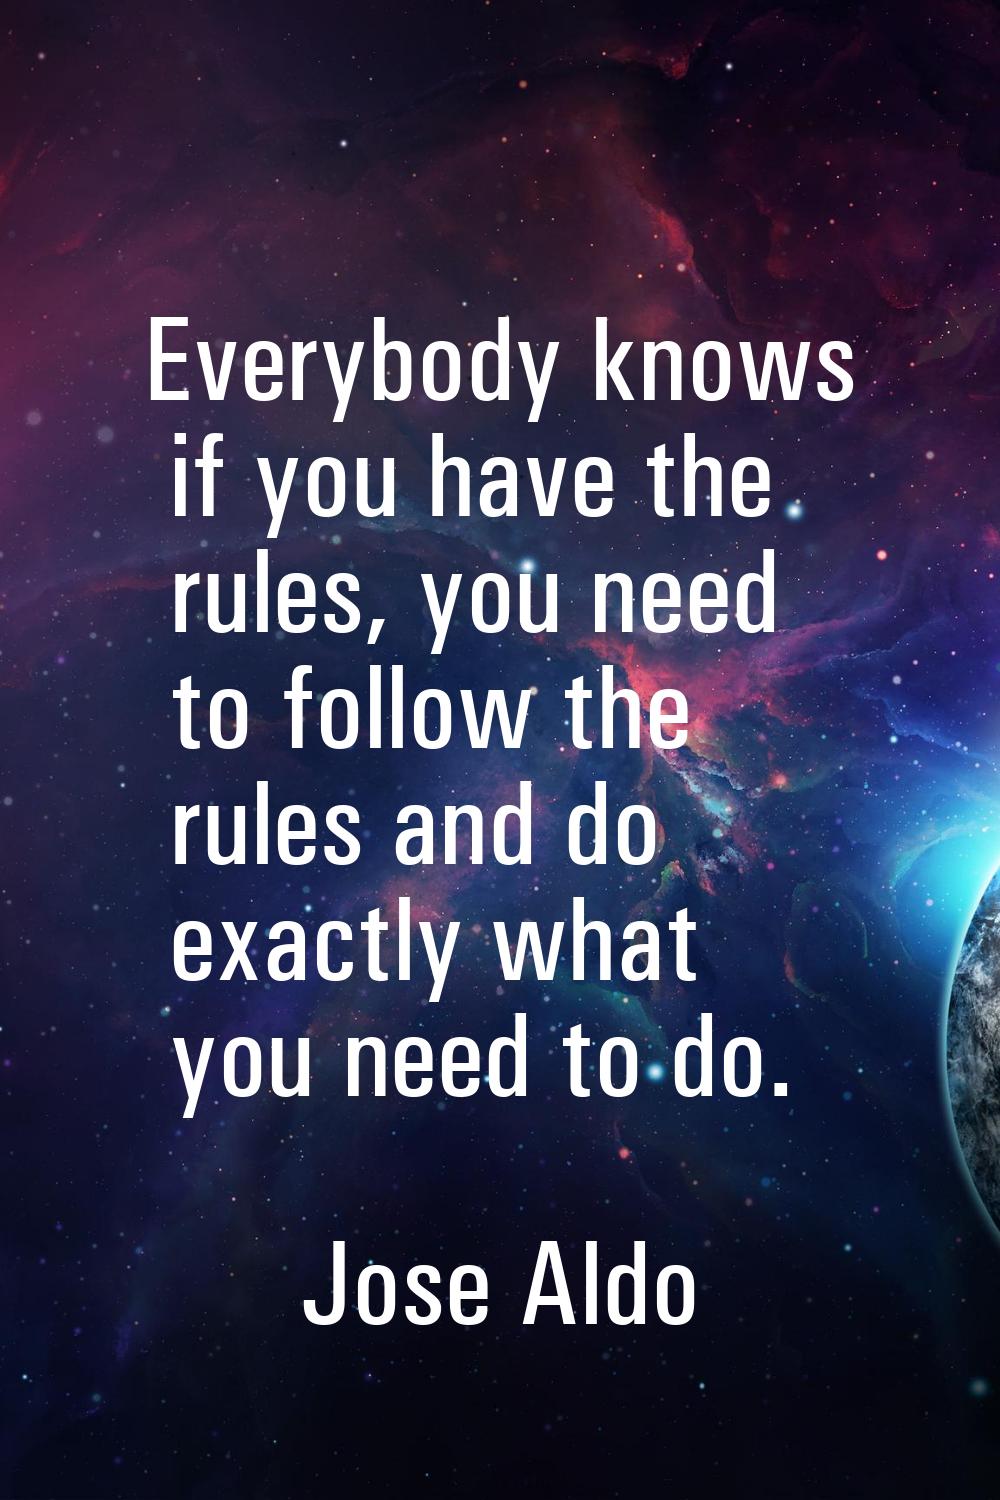 Everybody knows if you have the rules, you need to follow the rules and do exactly what you need to